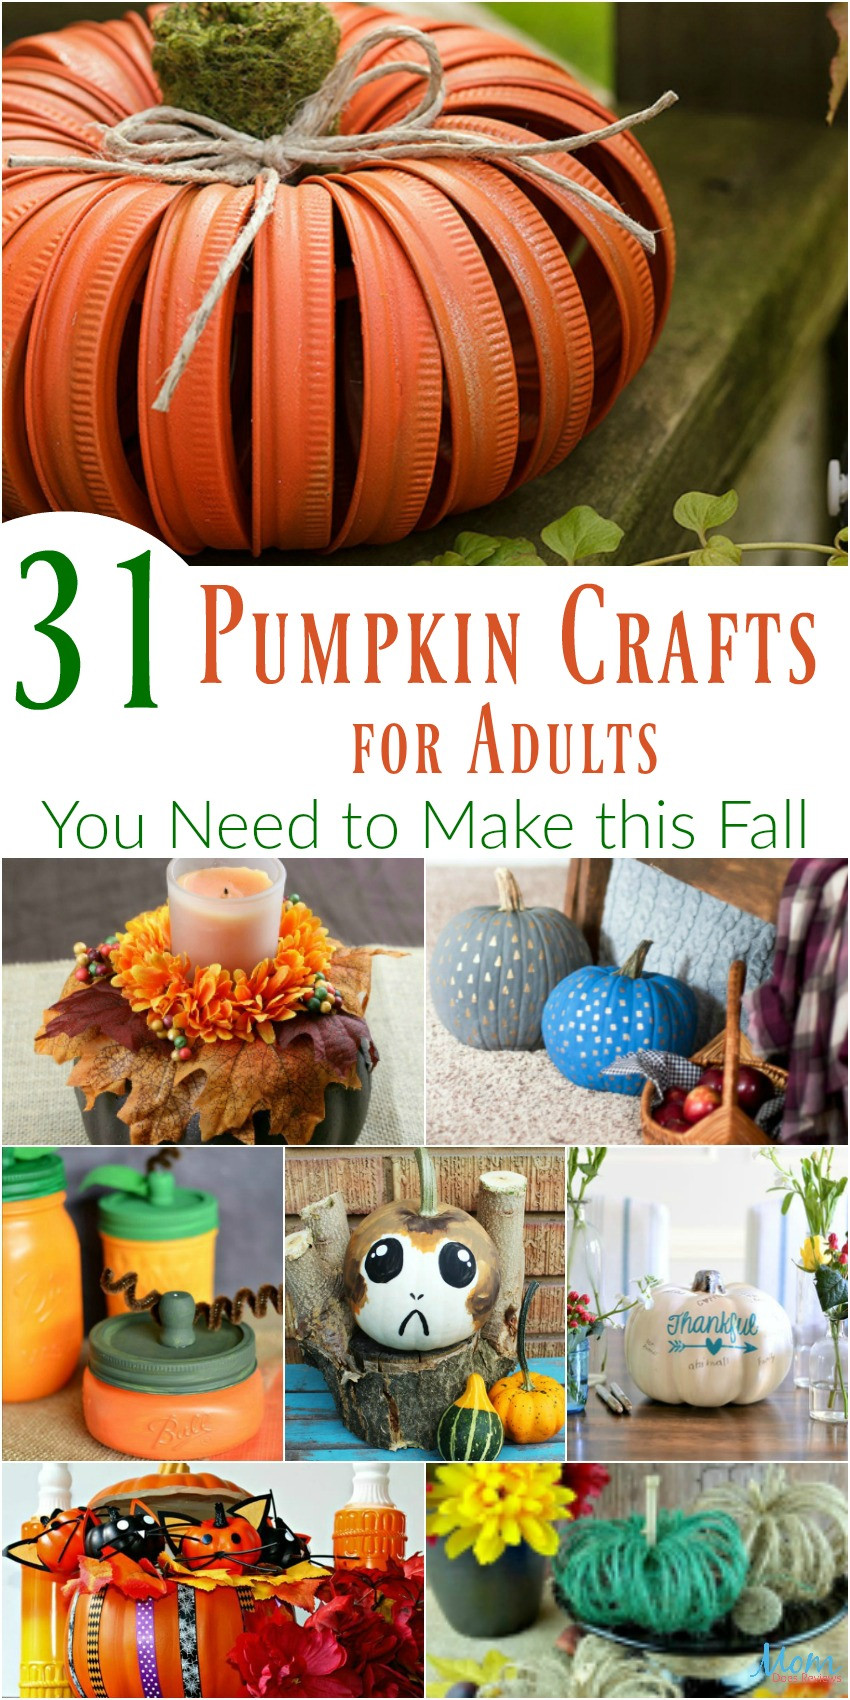 Activity Ideas For Adults
 31 Pumpkin Crafts for Adults You Need to Make this Fall